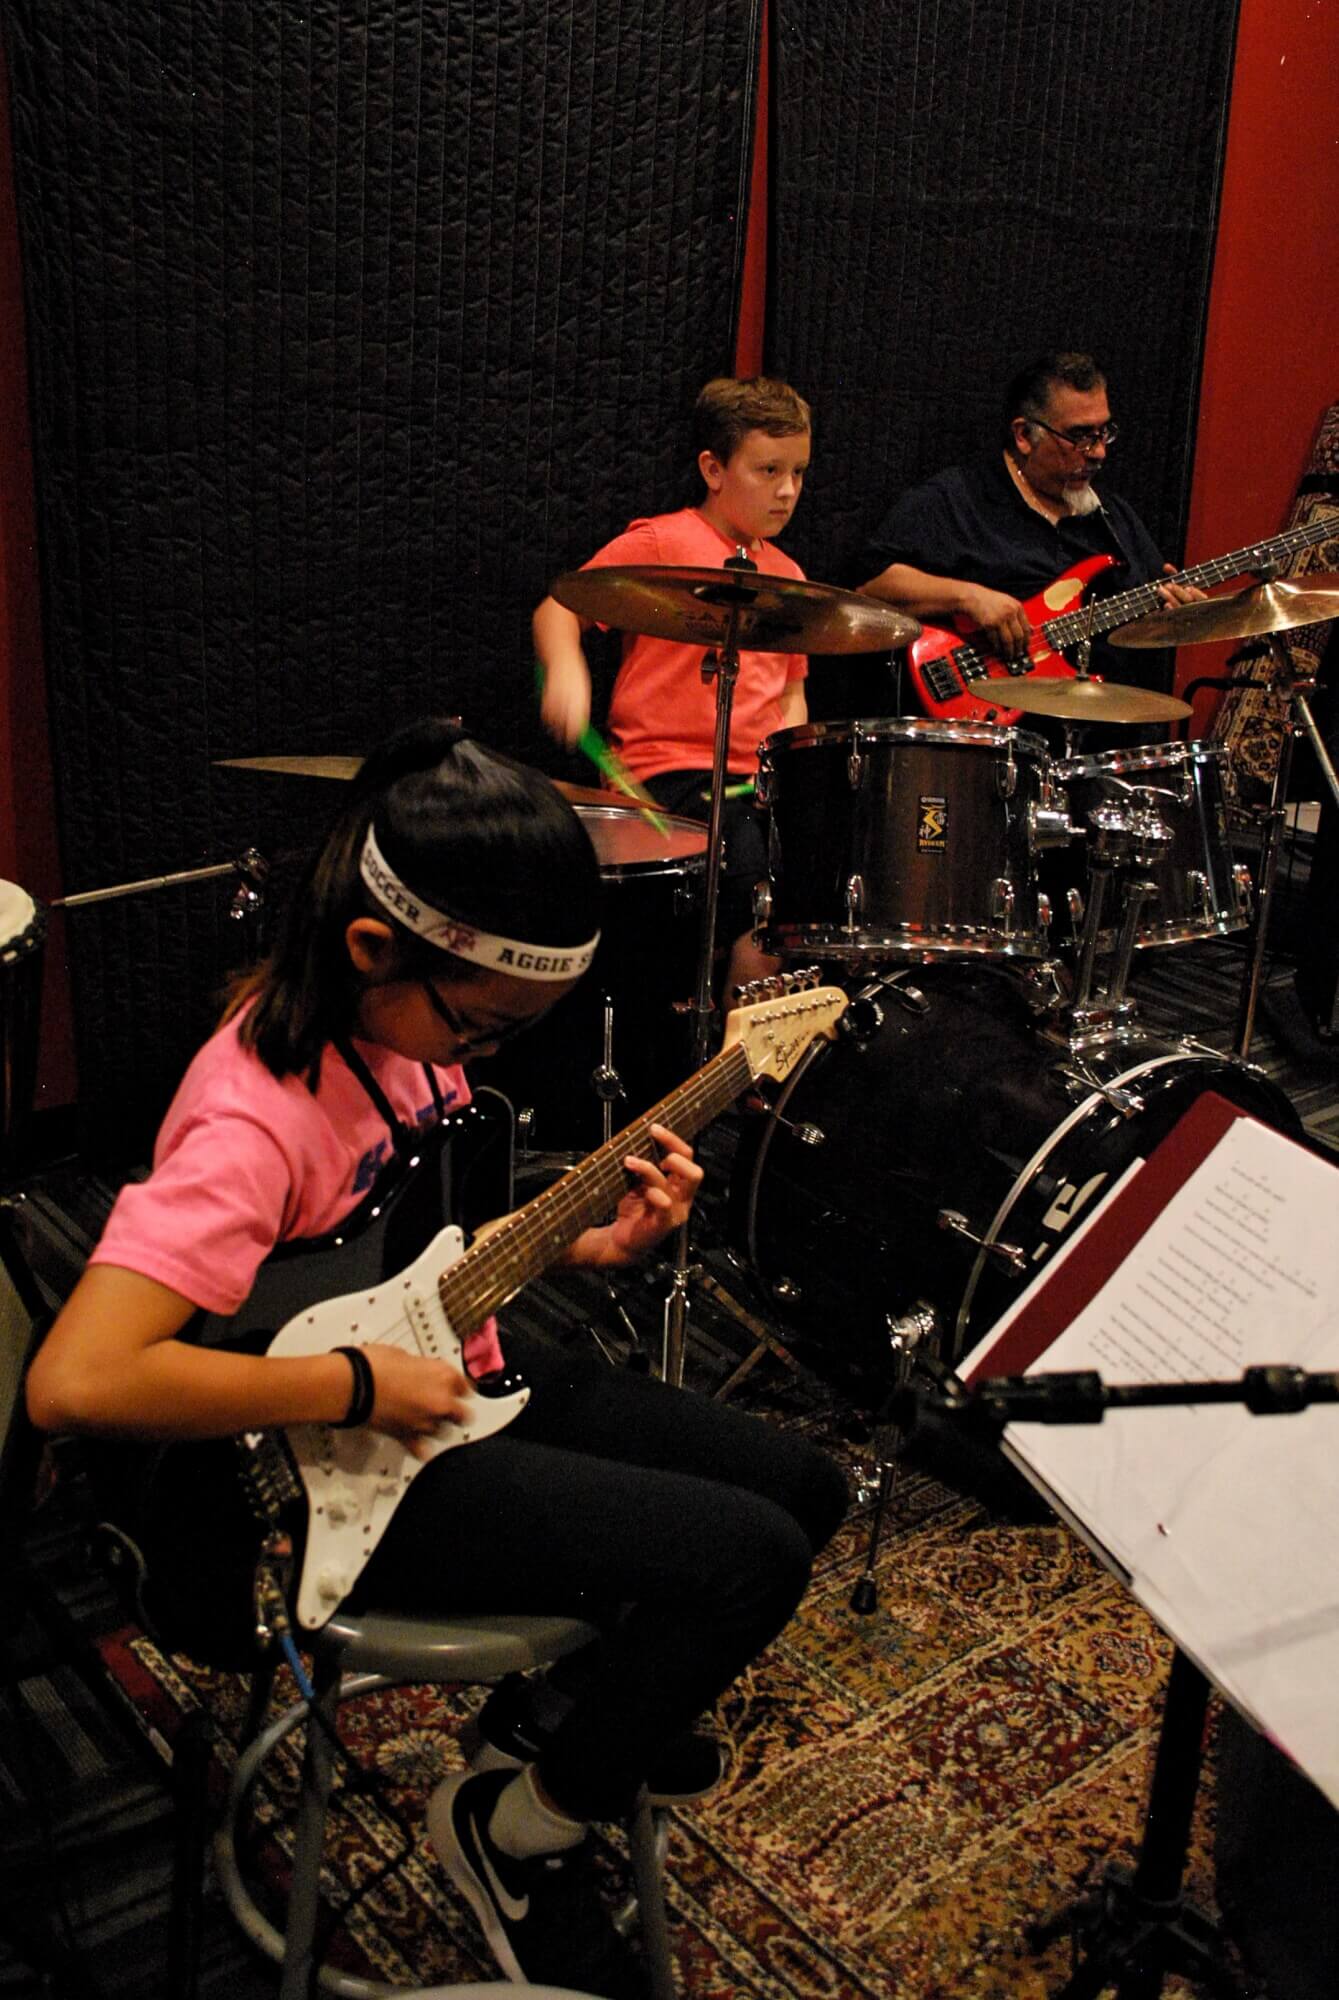 Rock 101 students work through their parts with Director Evetier Barron, laying down some bass.